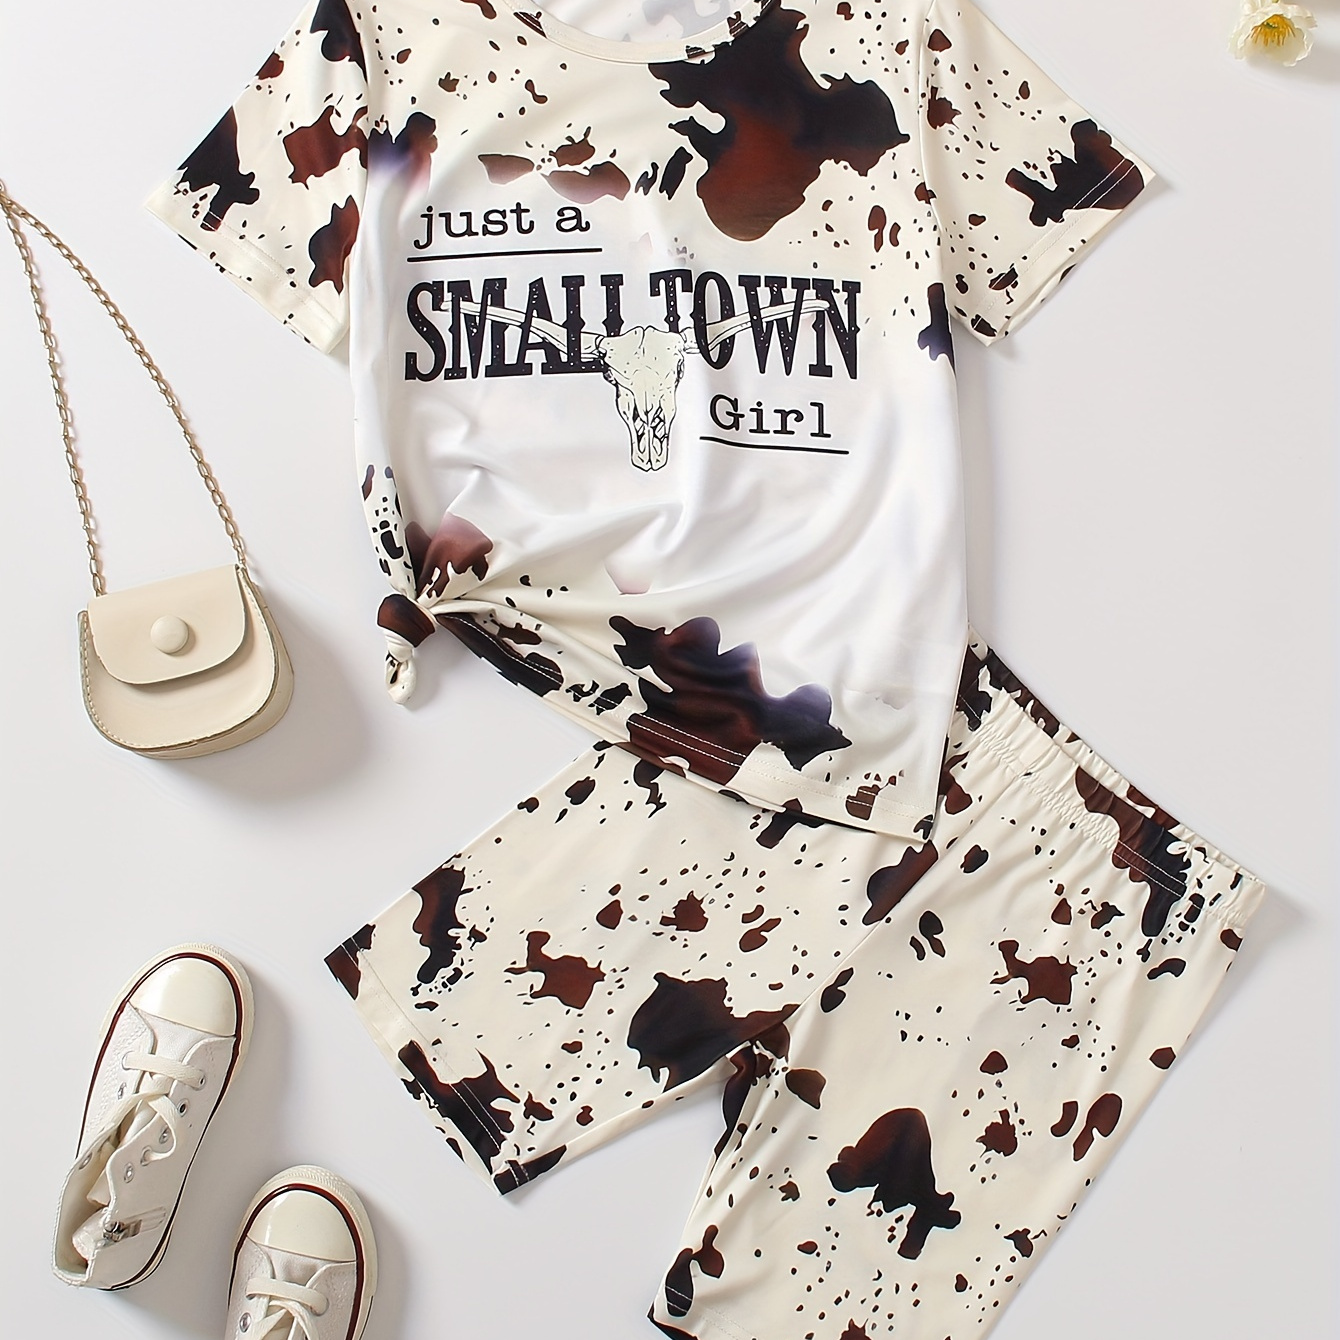 

'small Town Girl' Pattern Girl's Outfit Short Sleeve Top & Shorts Set, Casual Style 2pcs Summer Clothes